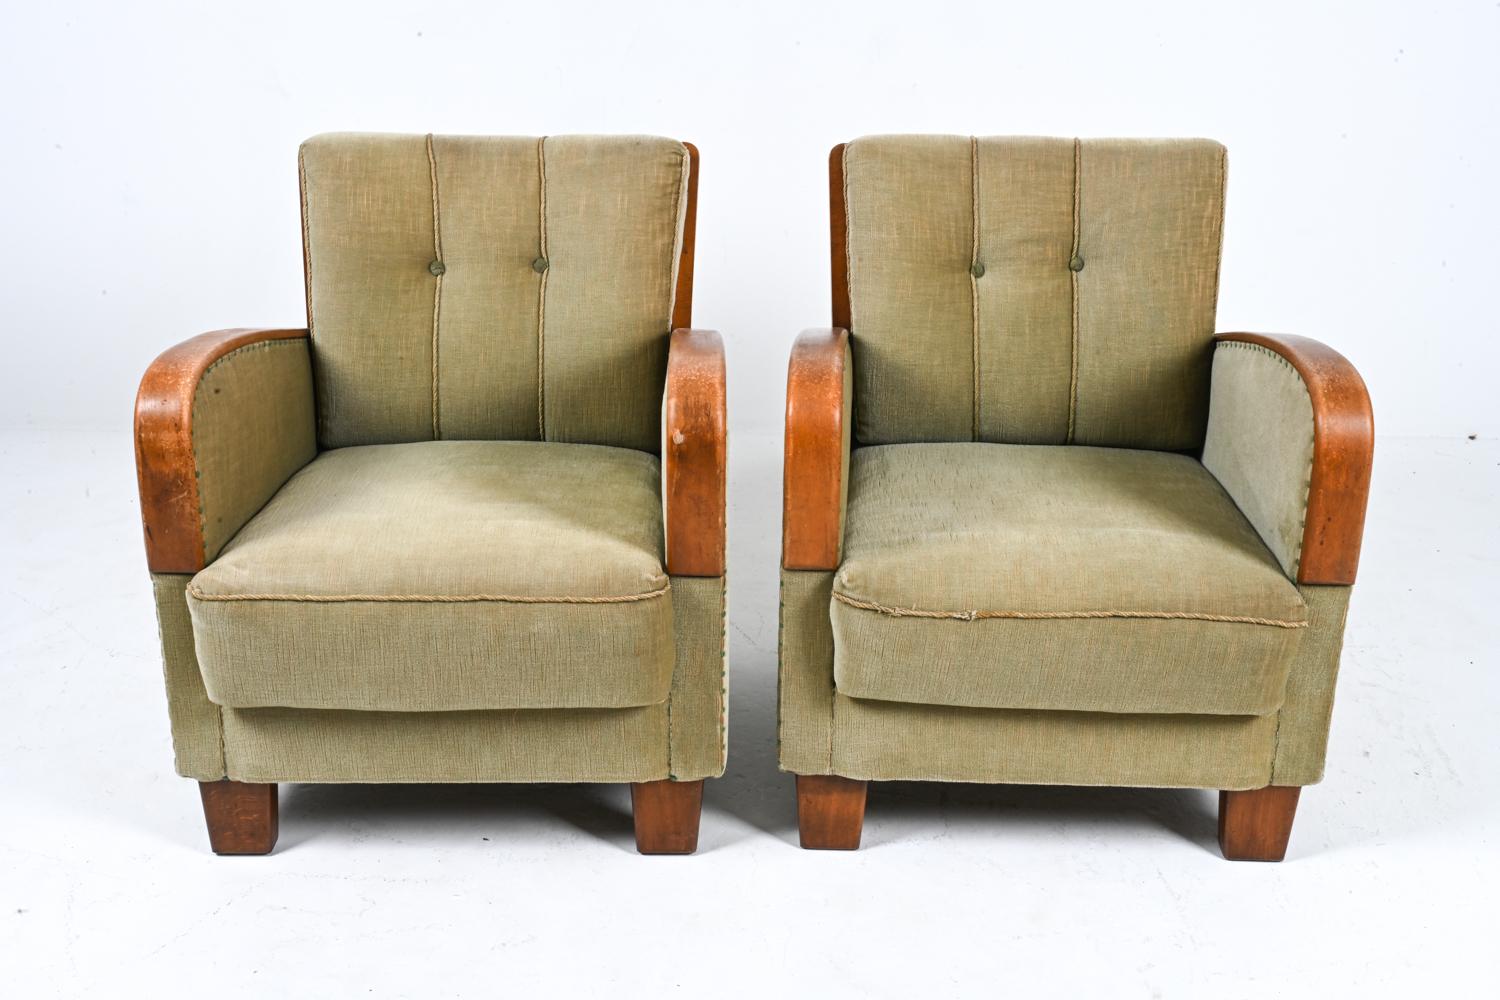 20th Century Pair of German Art Deco Oak Easy Chairs, c. 1940's For Sale